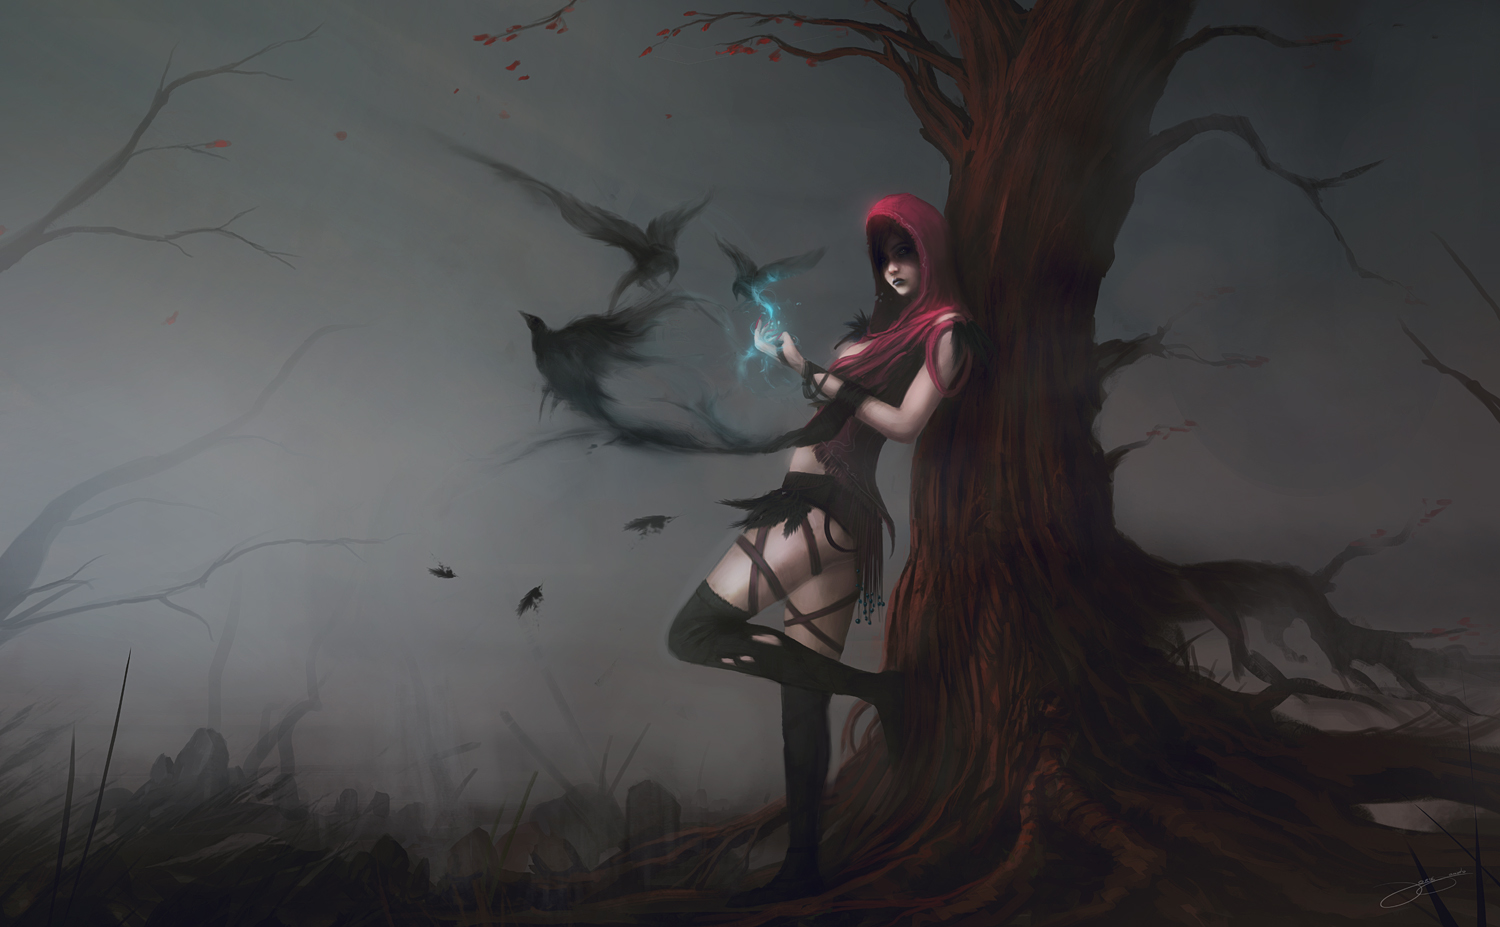 witch_of_the_wilds_by_blinck-d4sv4qv.jpg